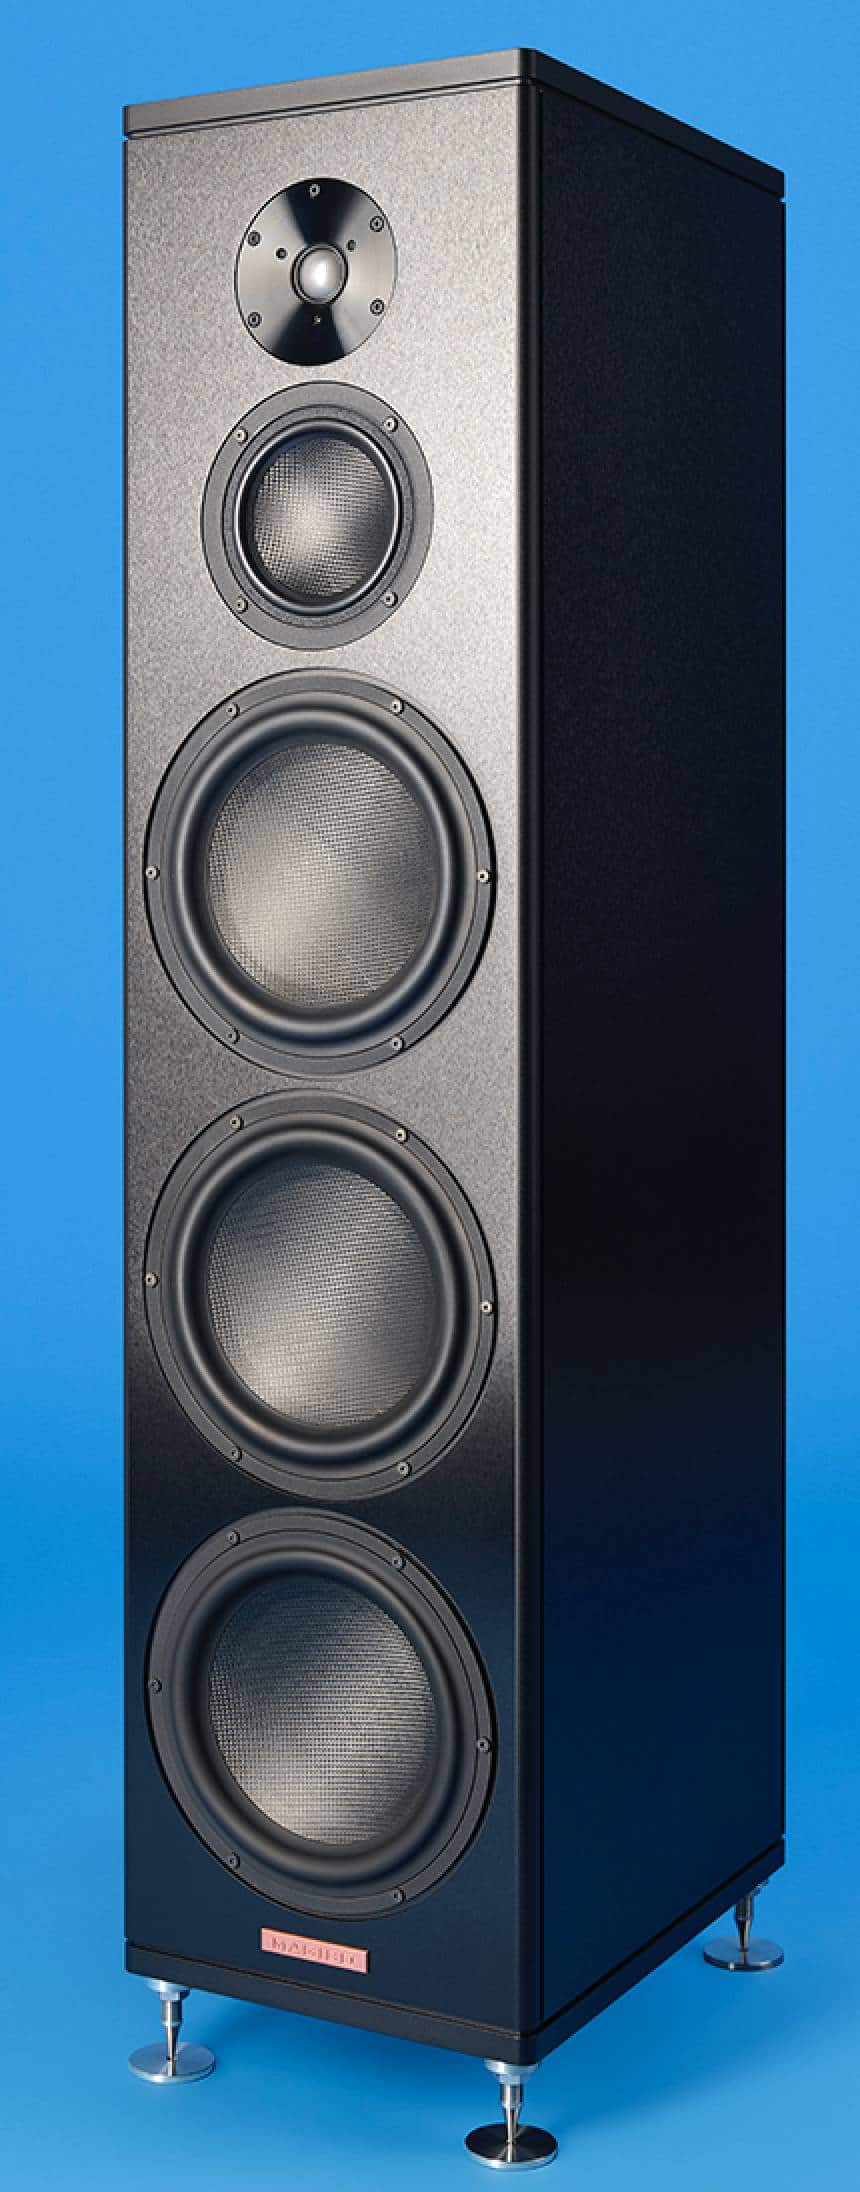 A5 Speaker From Magico